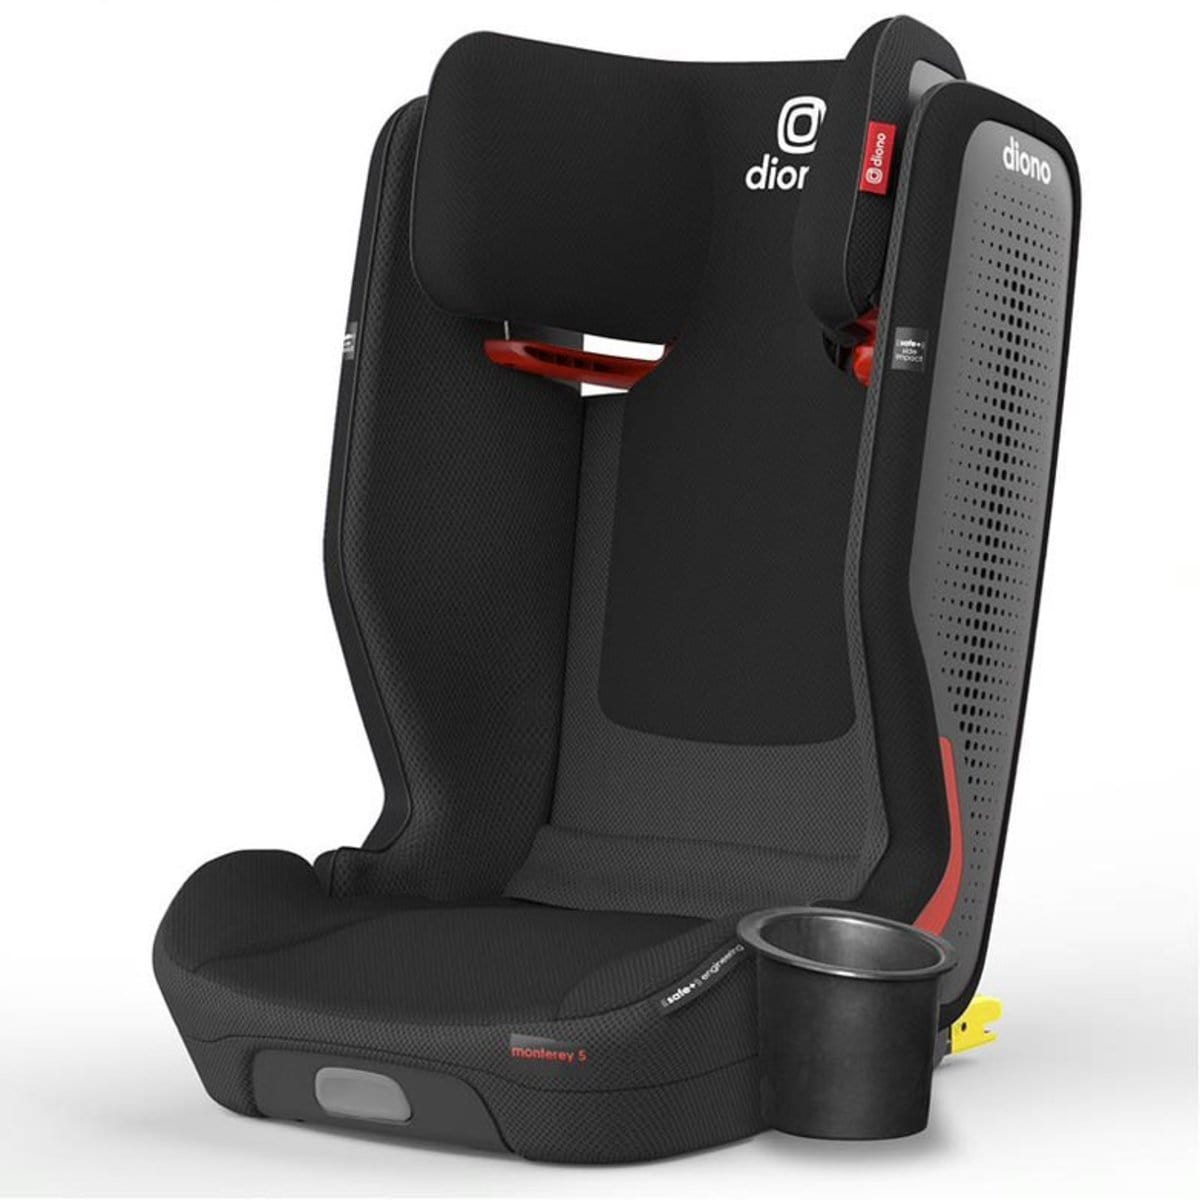 https://cdn.shopify.com/s/files/1/0010/7292/2684/products/71941-diono-monterey-5ist-booster-car-seat-38750977425634.jpg?v=1671834775